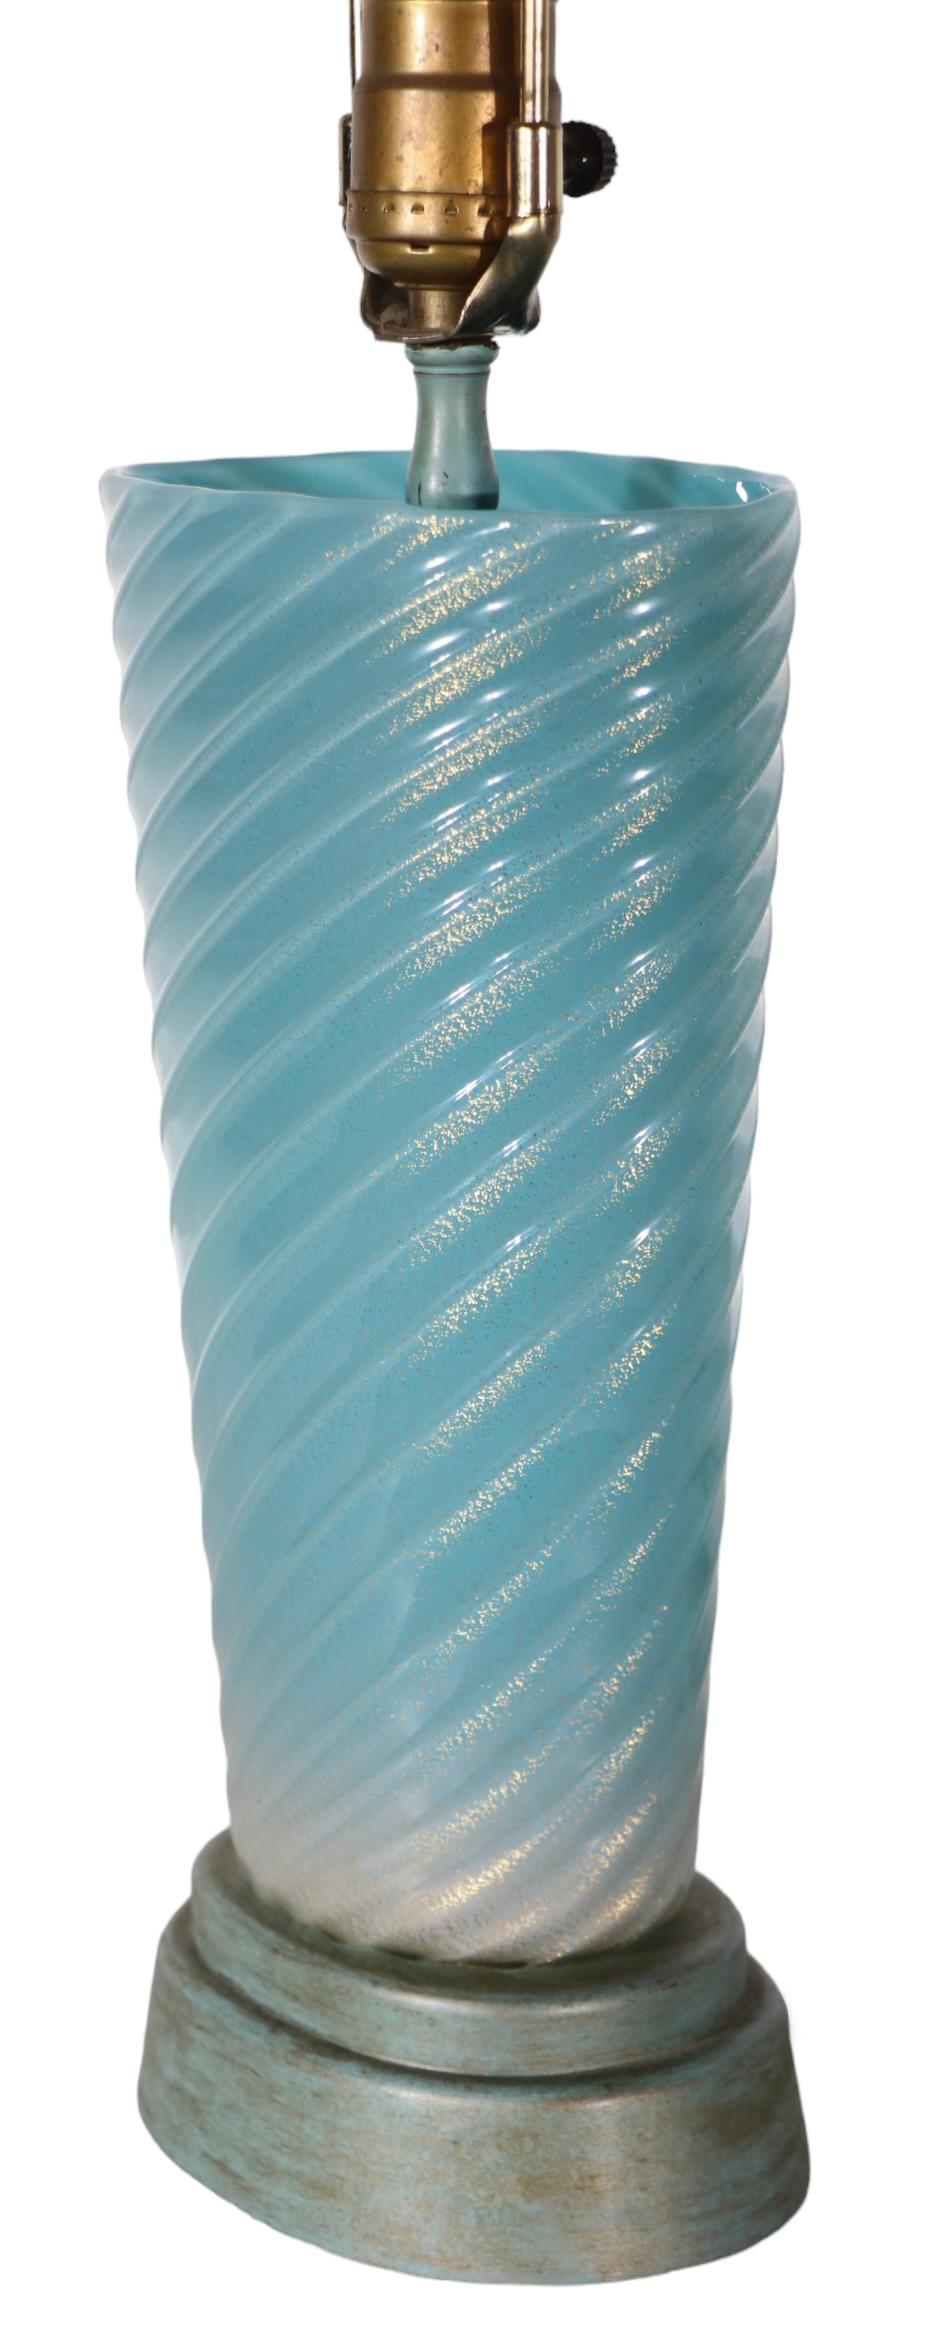 Murano Glass Lamp Blue Swirl with Gold Inclusion possibly Fratelli Toso, Seguso  For Sale 10